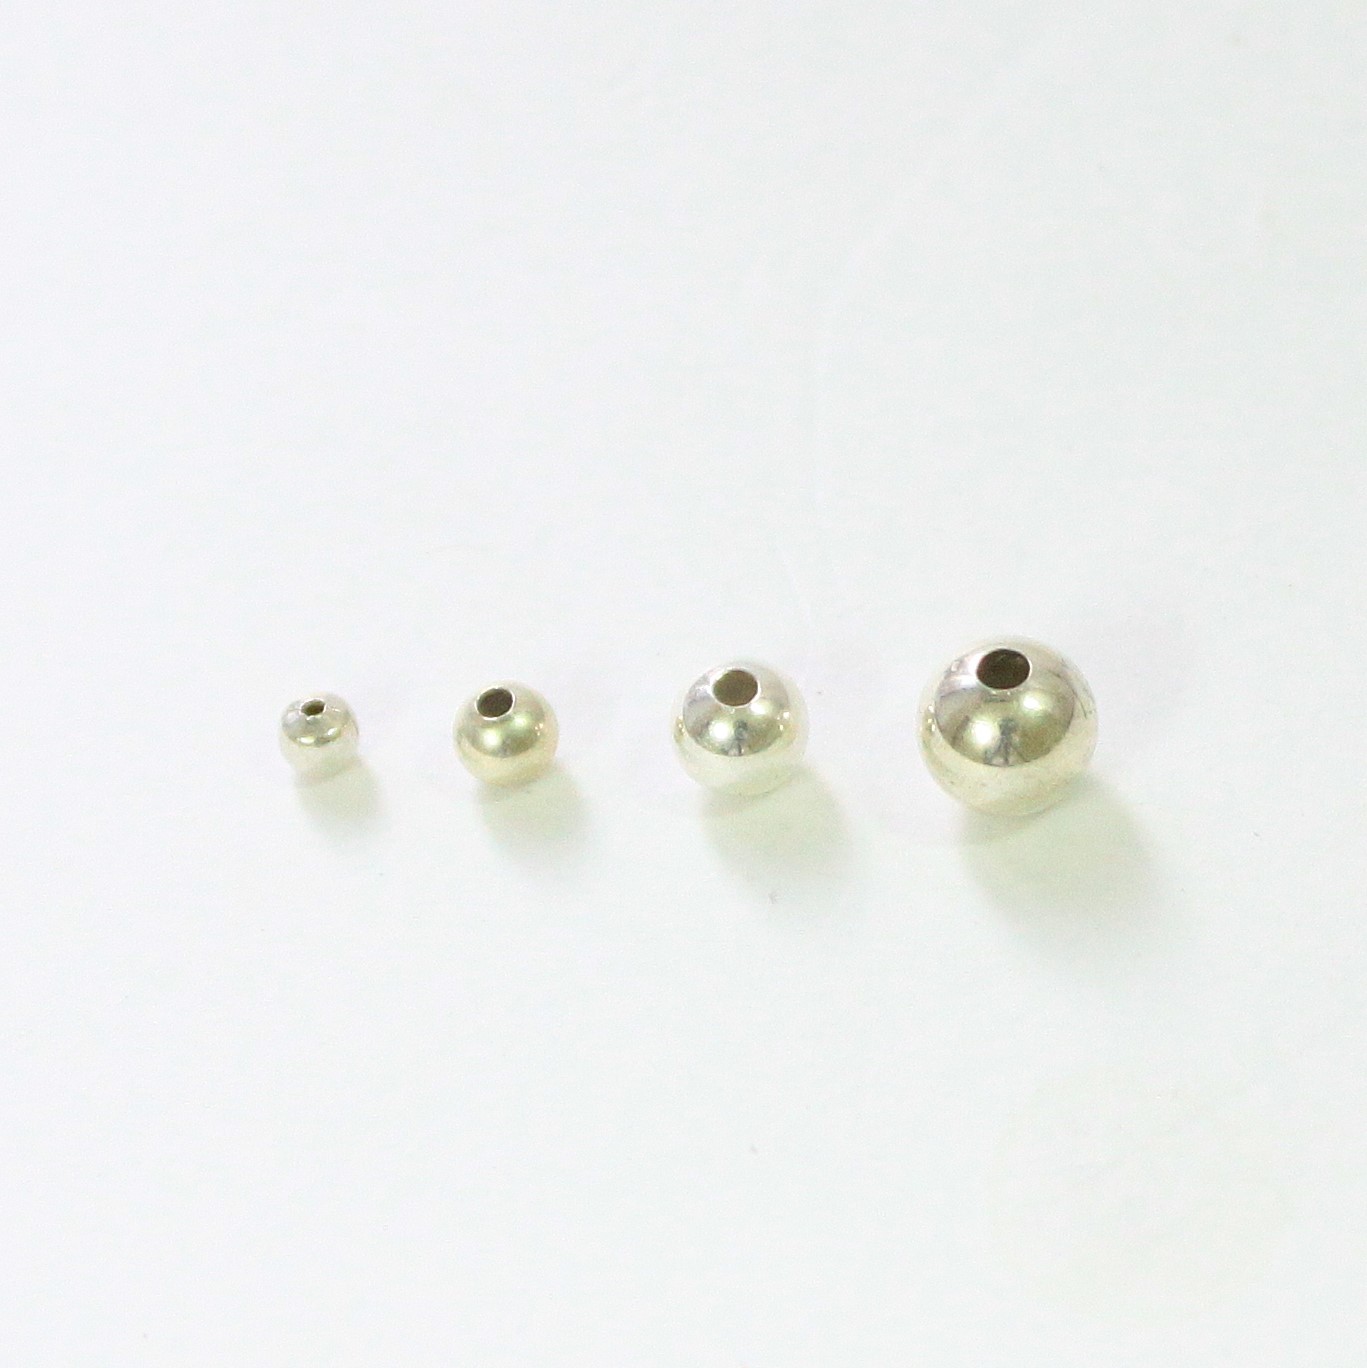 Silver Spacer Beads, Mini Beads, Round Beads, Silver Flower Beads, Jewelry  Spacers, Tiny Silver Beads, Flat Beads, Silver Jewelry, 50 Pc 